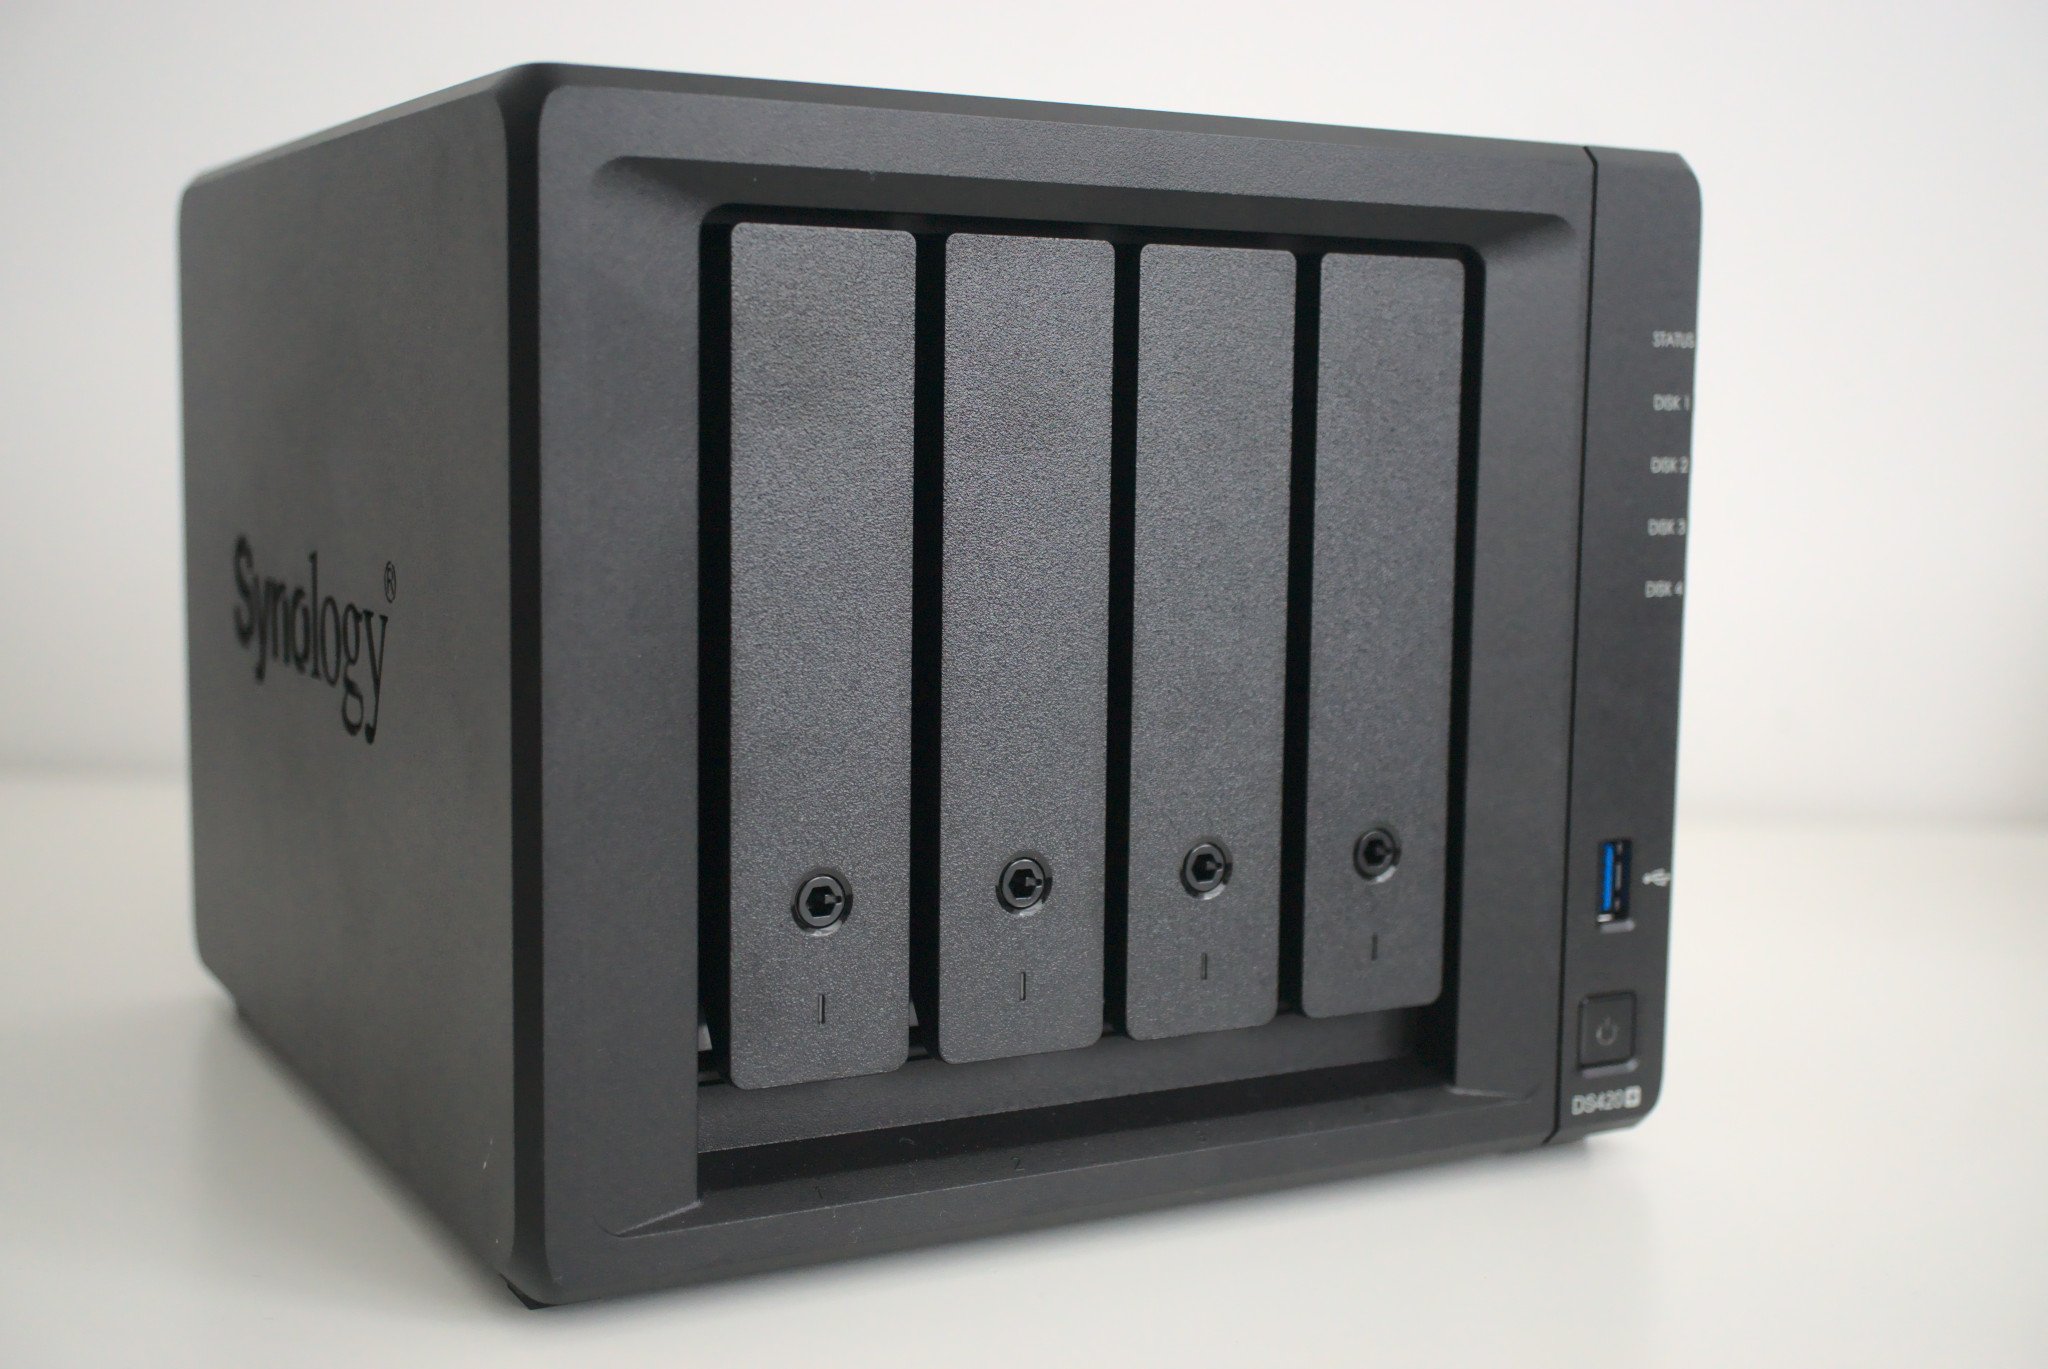 Synology DS420+ review: Revised internals make this one compelling ...